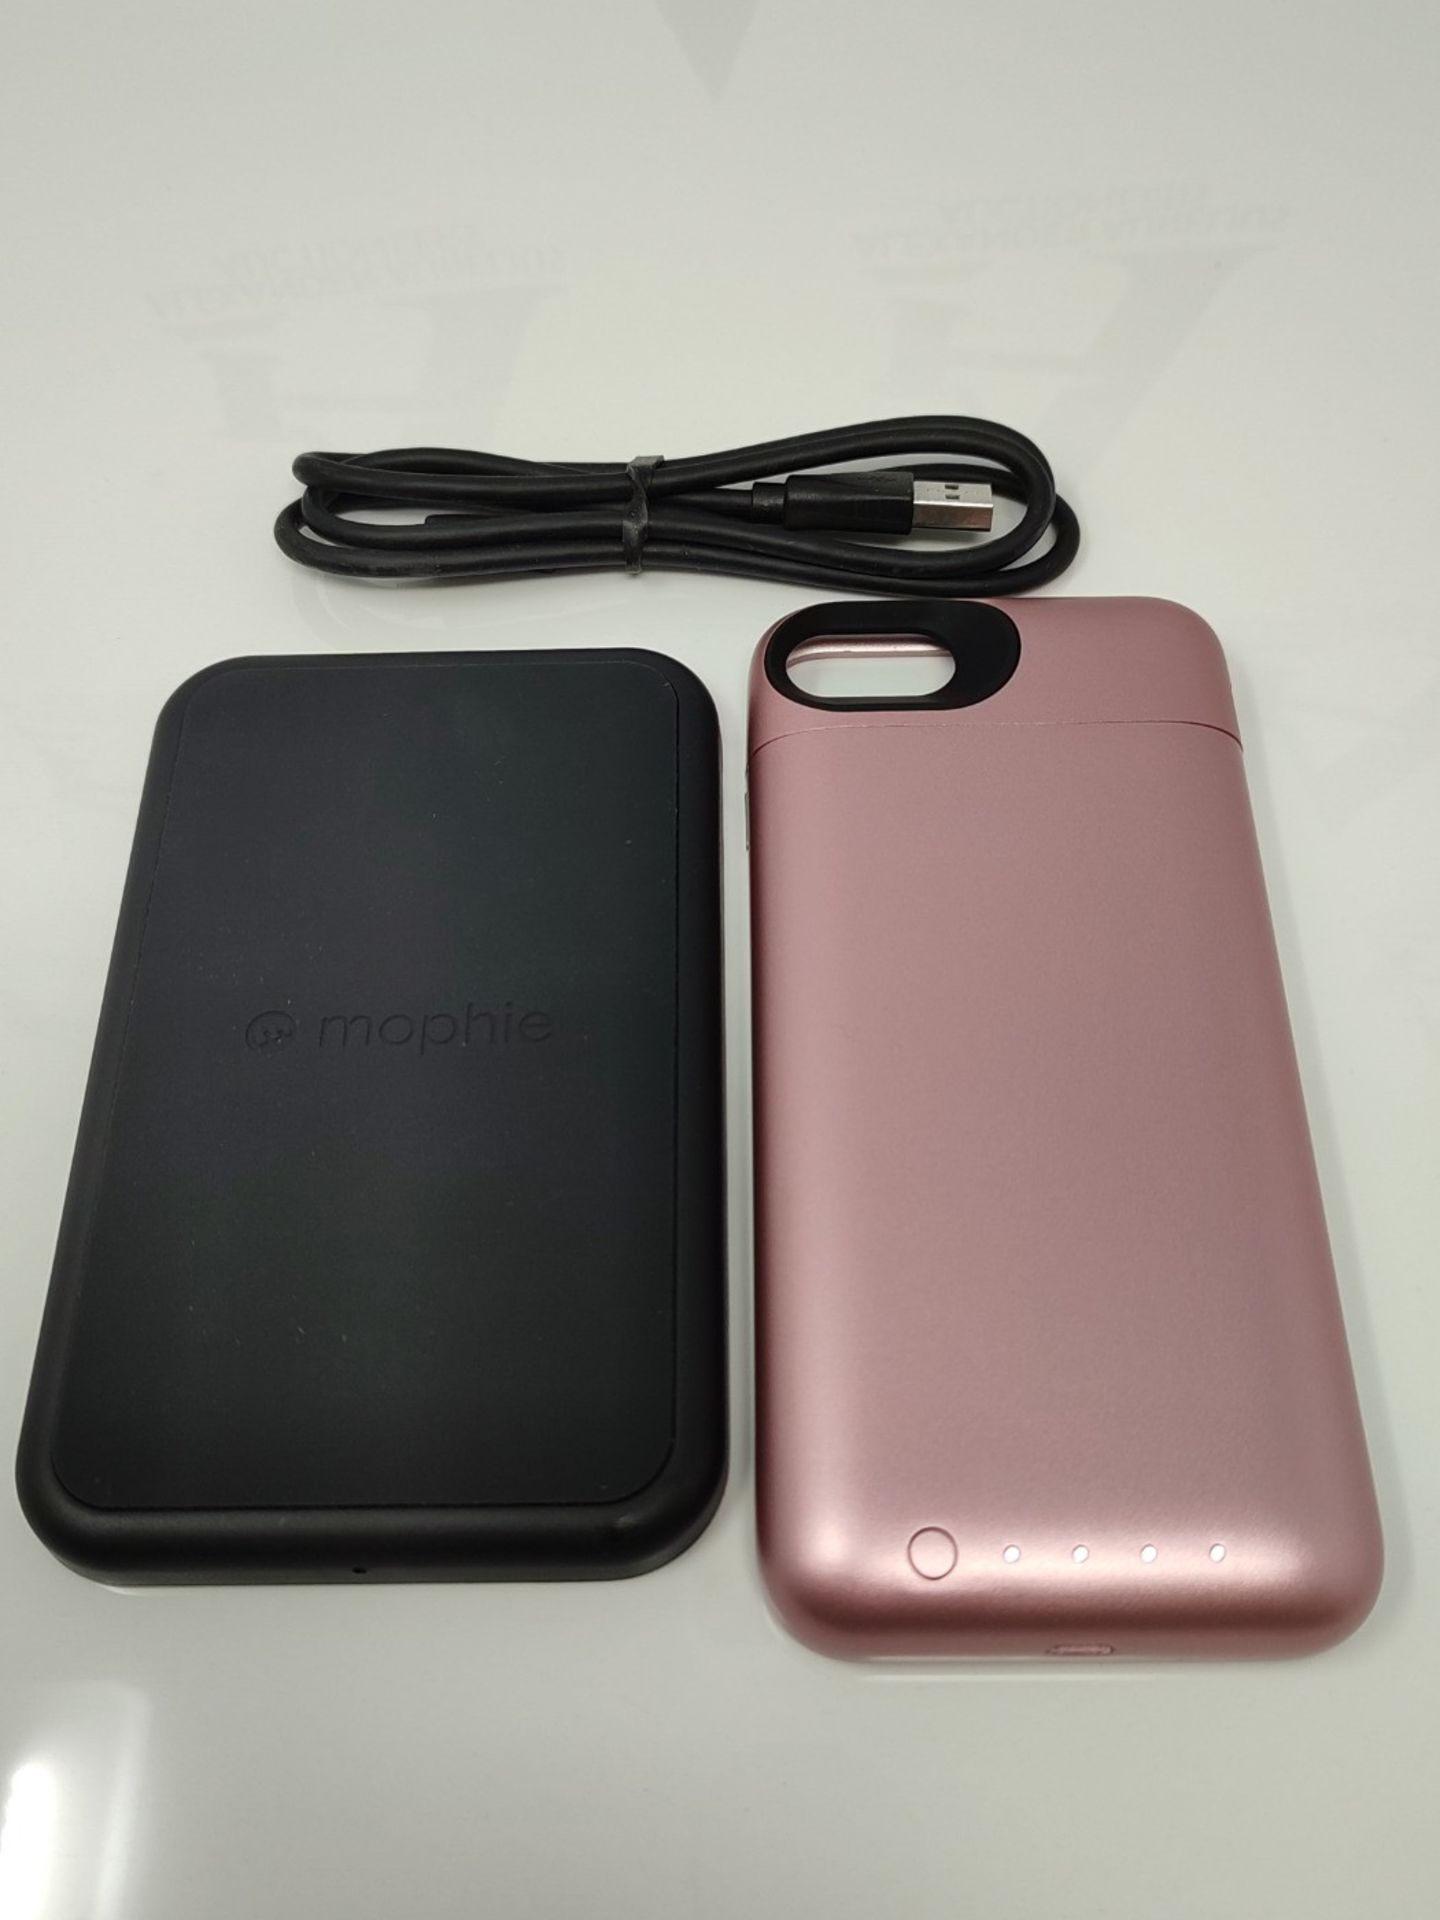 mophie juice pack Compact Battery Case for iPhone 6 Plus / 6S Plus - Rose Gold - Image 3 of 3